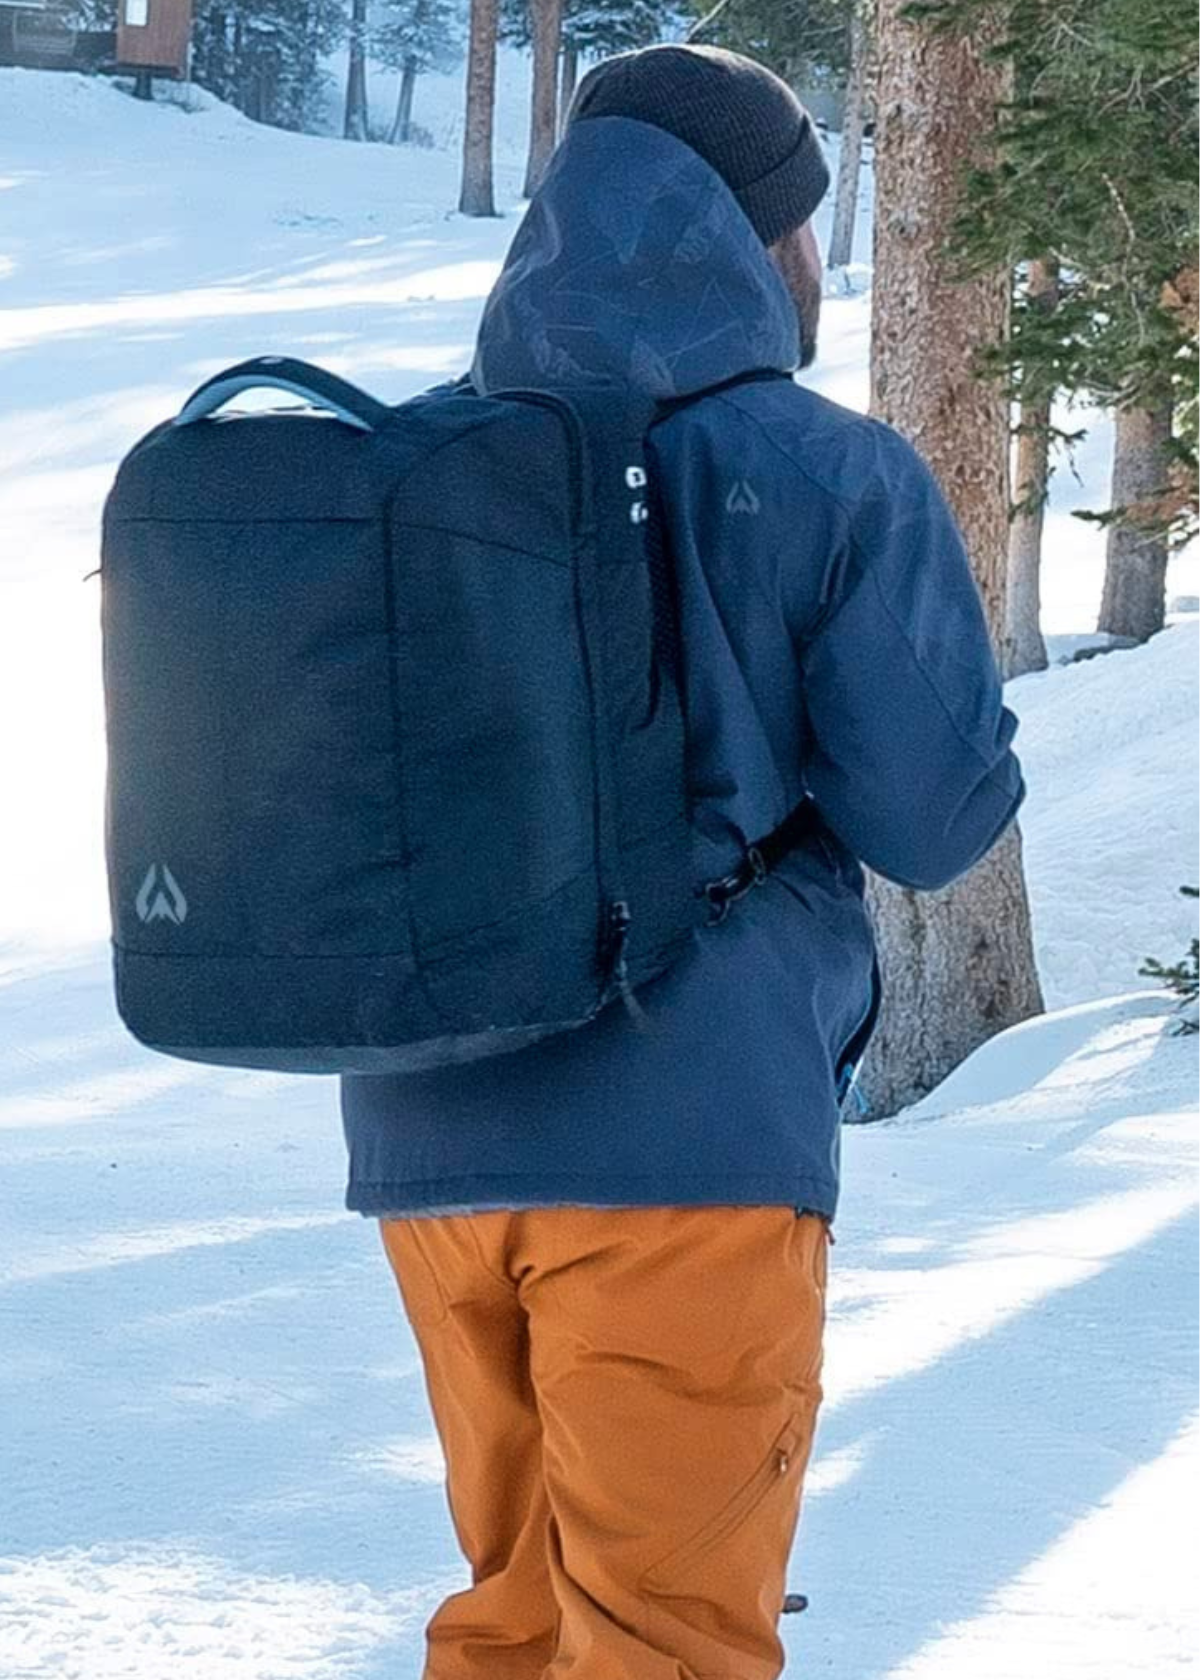 The Best Ski Backpacks for Your Next Big Adventure